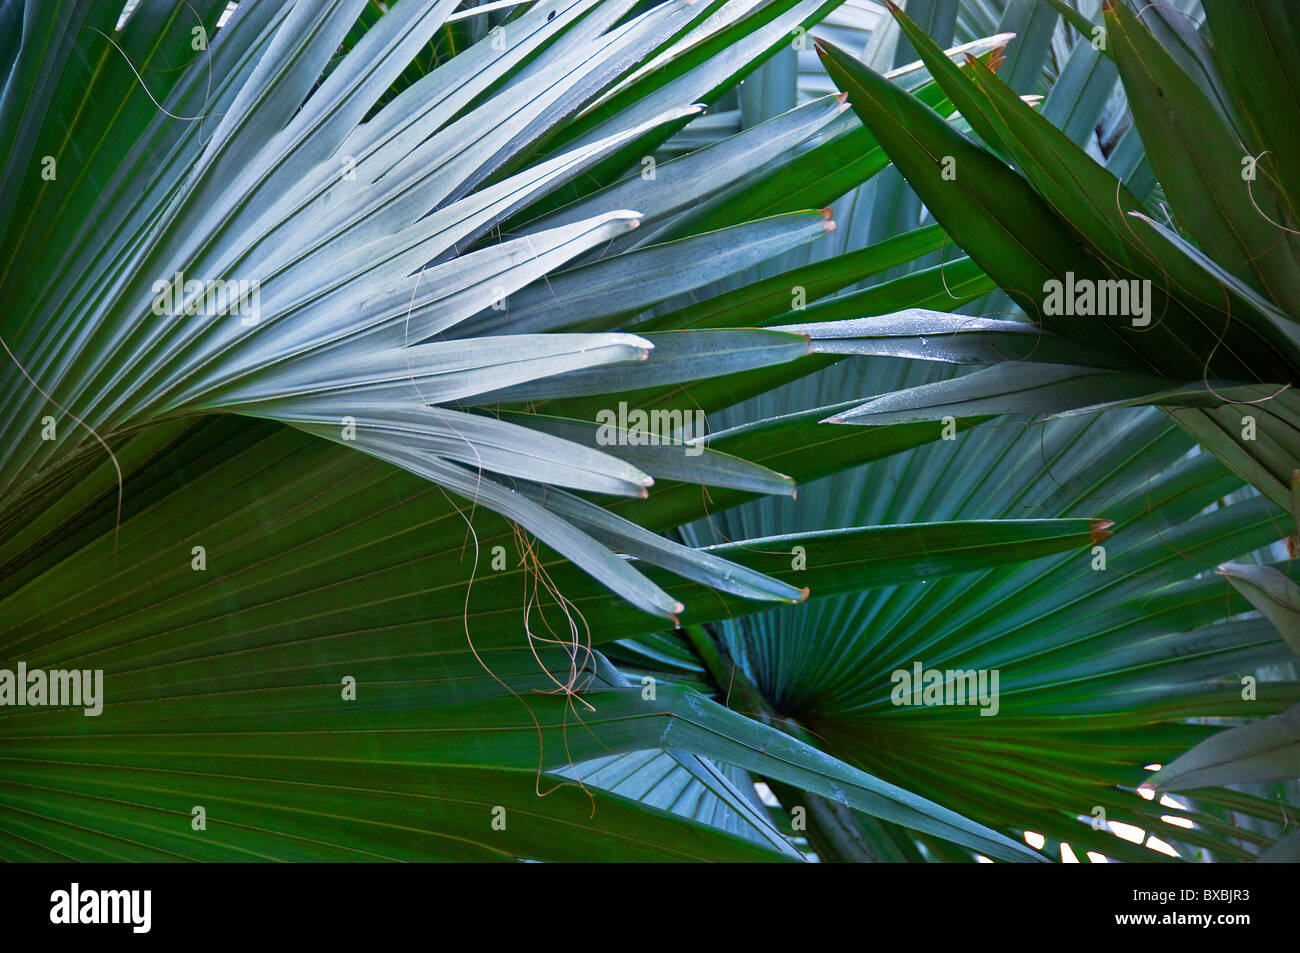 Leaves of a palm tree in Kuala Lumpur.  Photo by Gordon Scammell Stock Photo